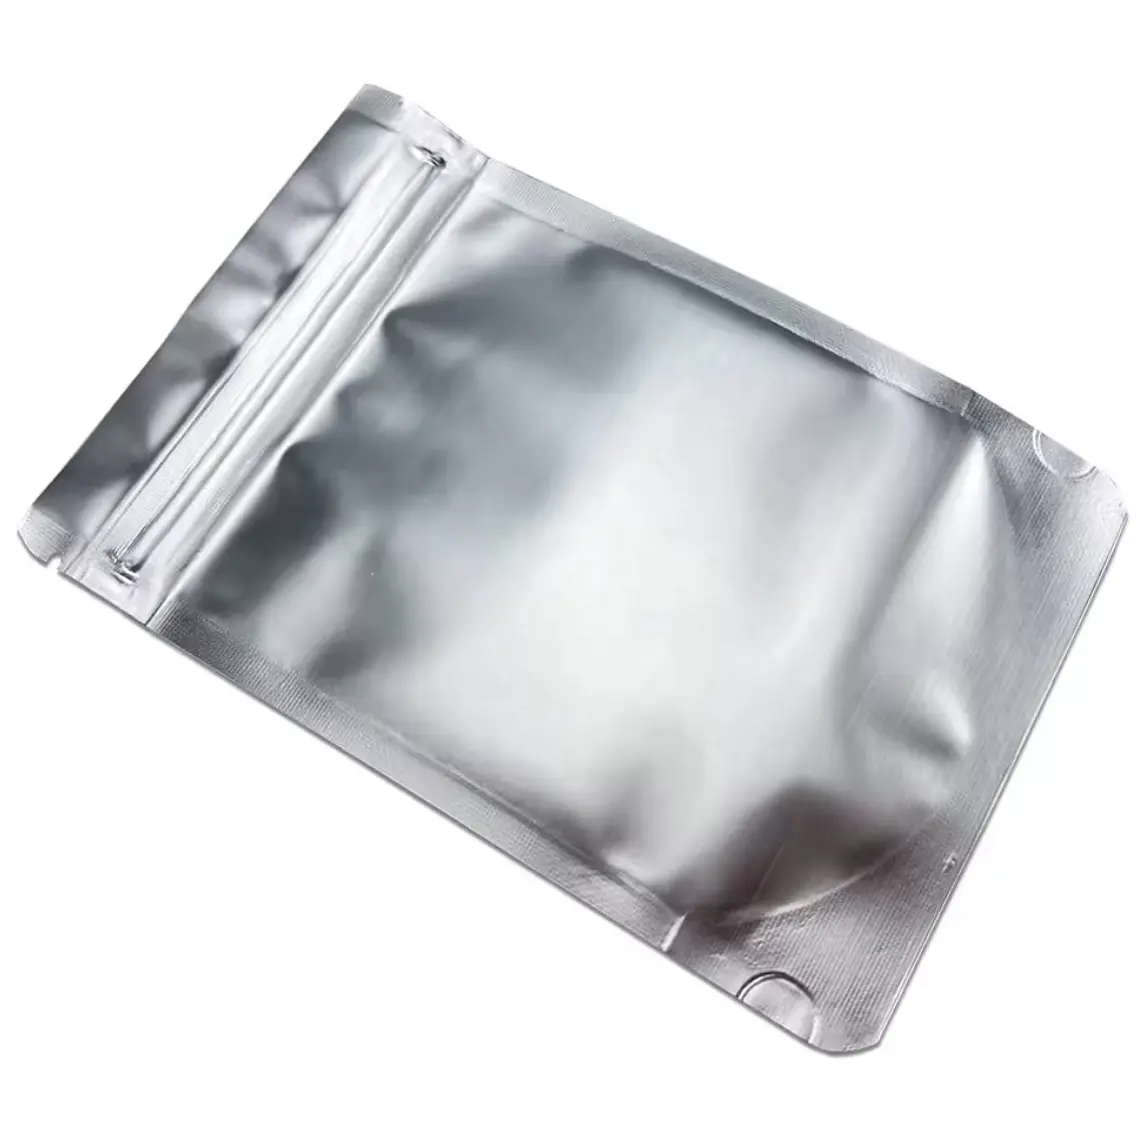 Mylar Bags With Ziplock 4" X 6" 100 Bags Sealable Heat Seal Bags For Candy Food Medications Vitamins